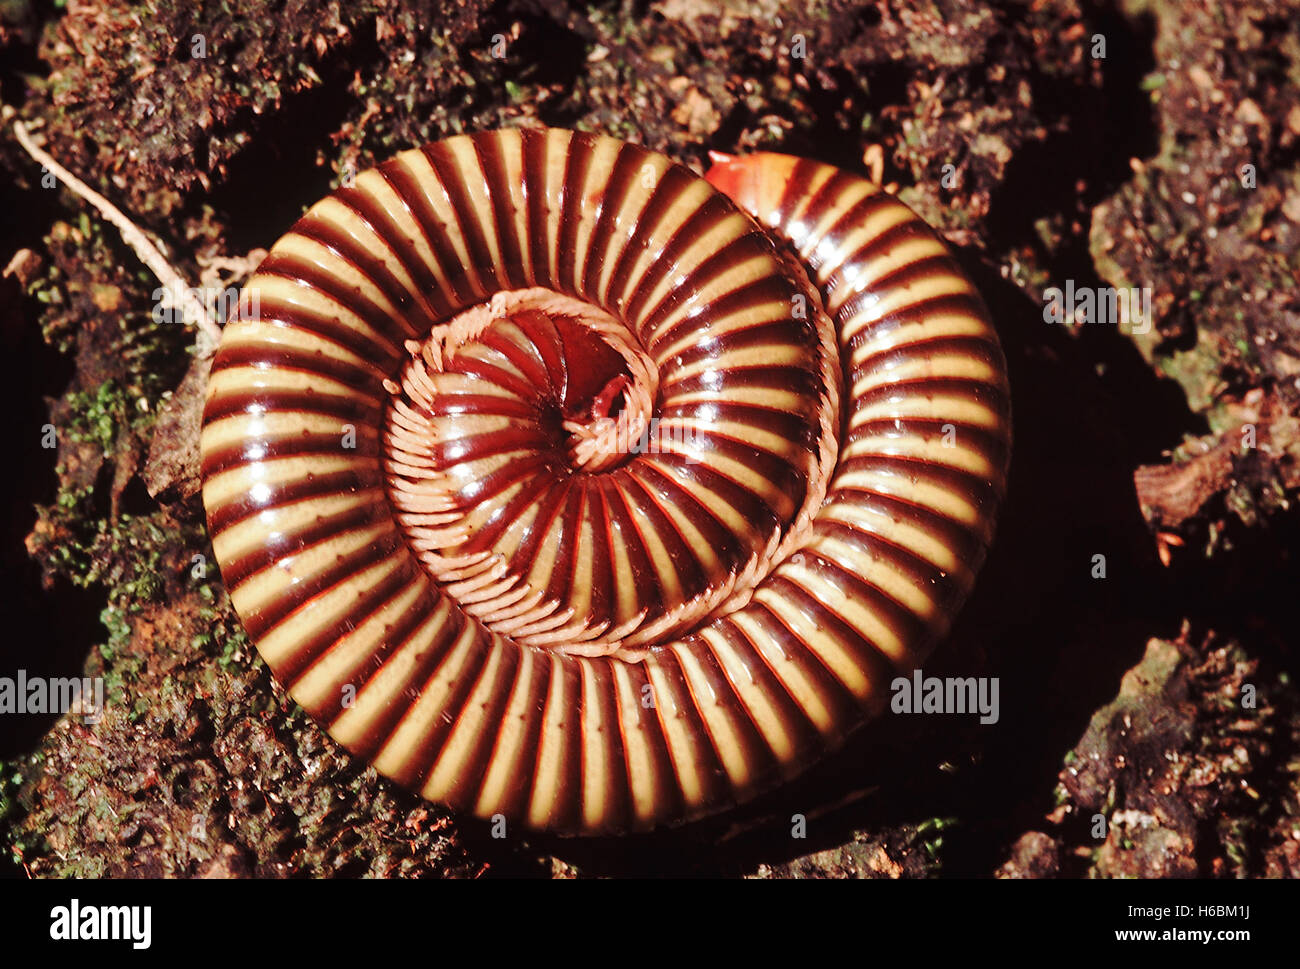 Millipede- coiled. A millipede in a coiled position after it has been disturbed. Stock Photo